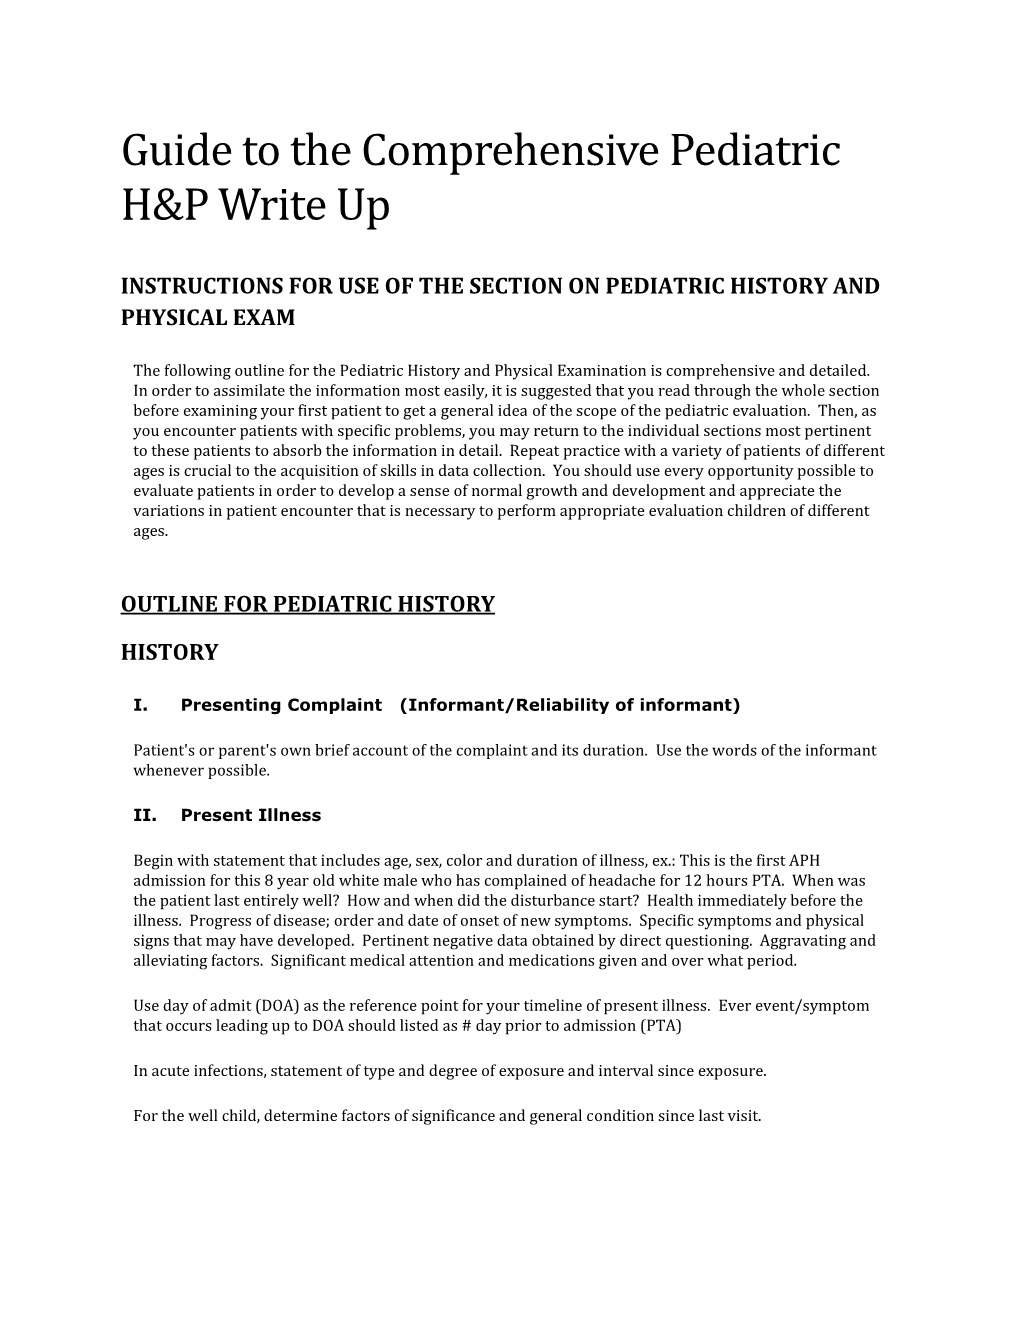 Guide to the Comprehensive Pediatric H&P Write Up